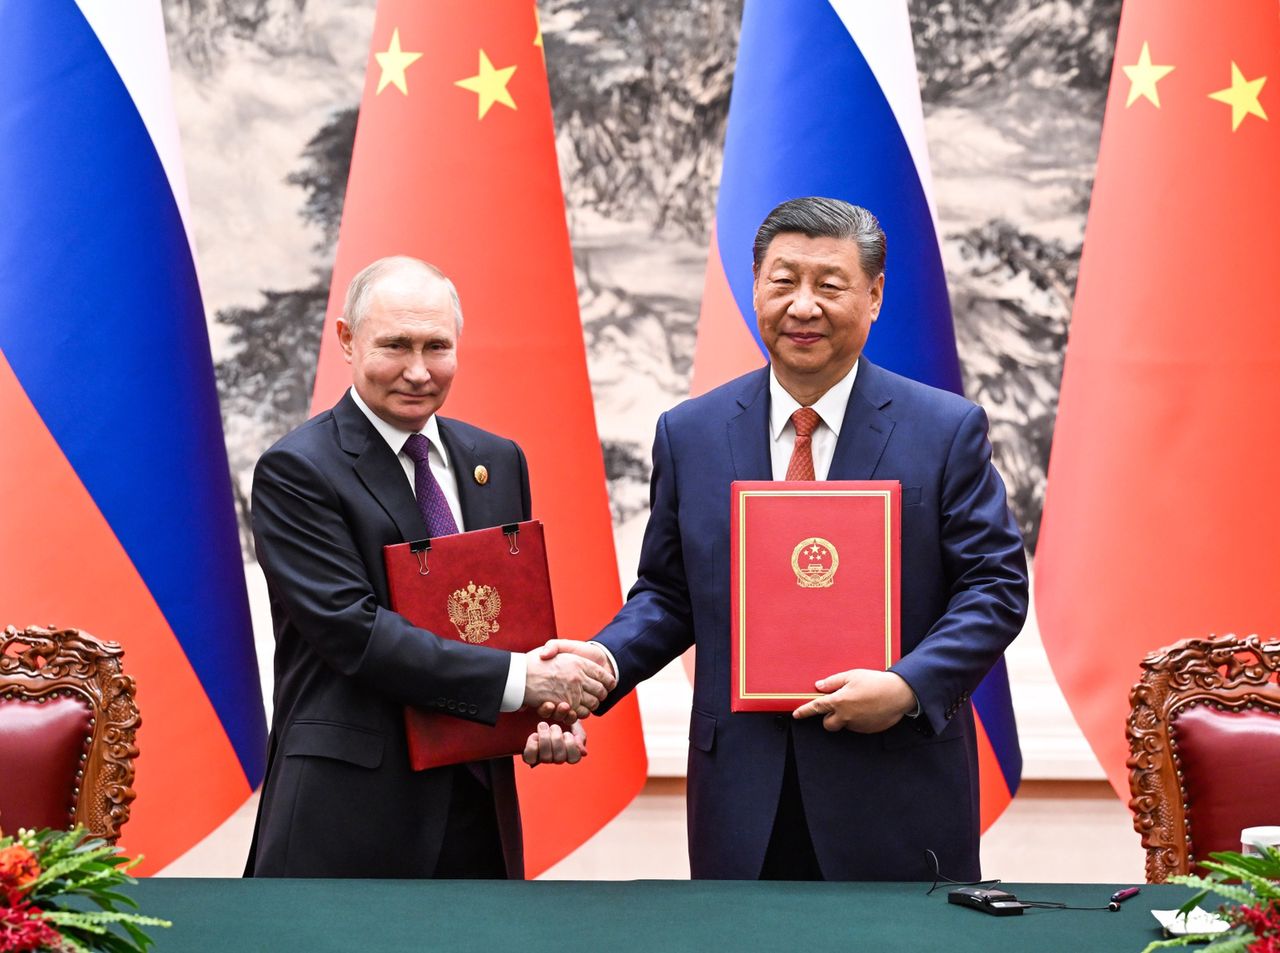 Putin woos China with oil pipeline plan amidst Western embargo